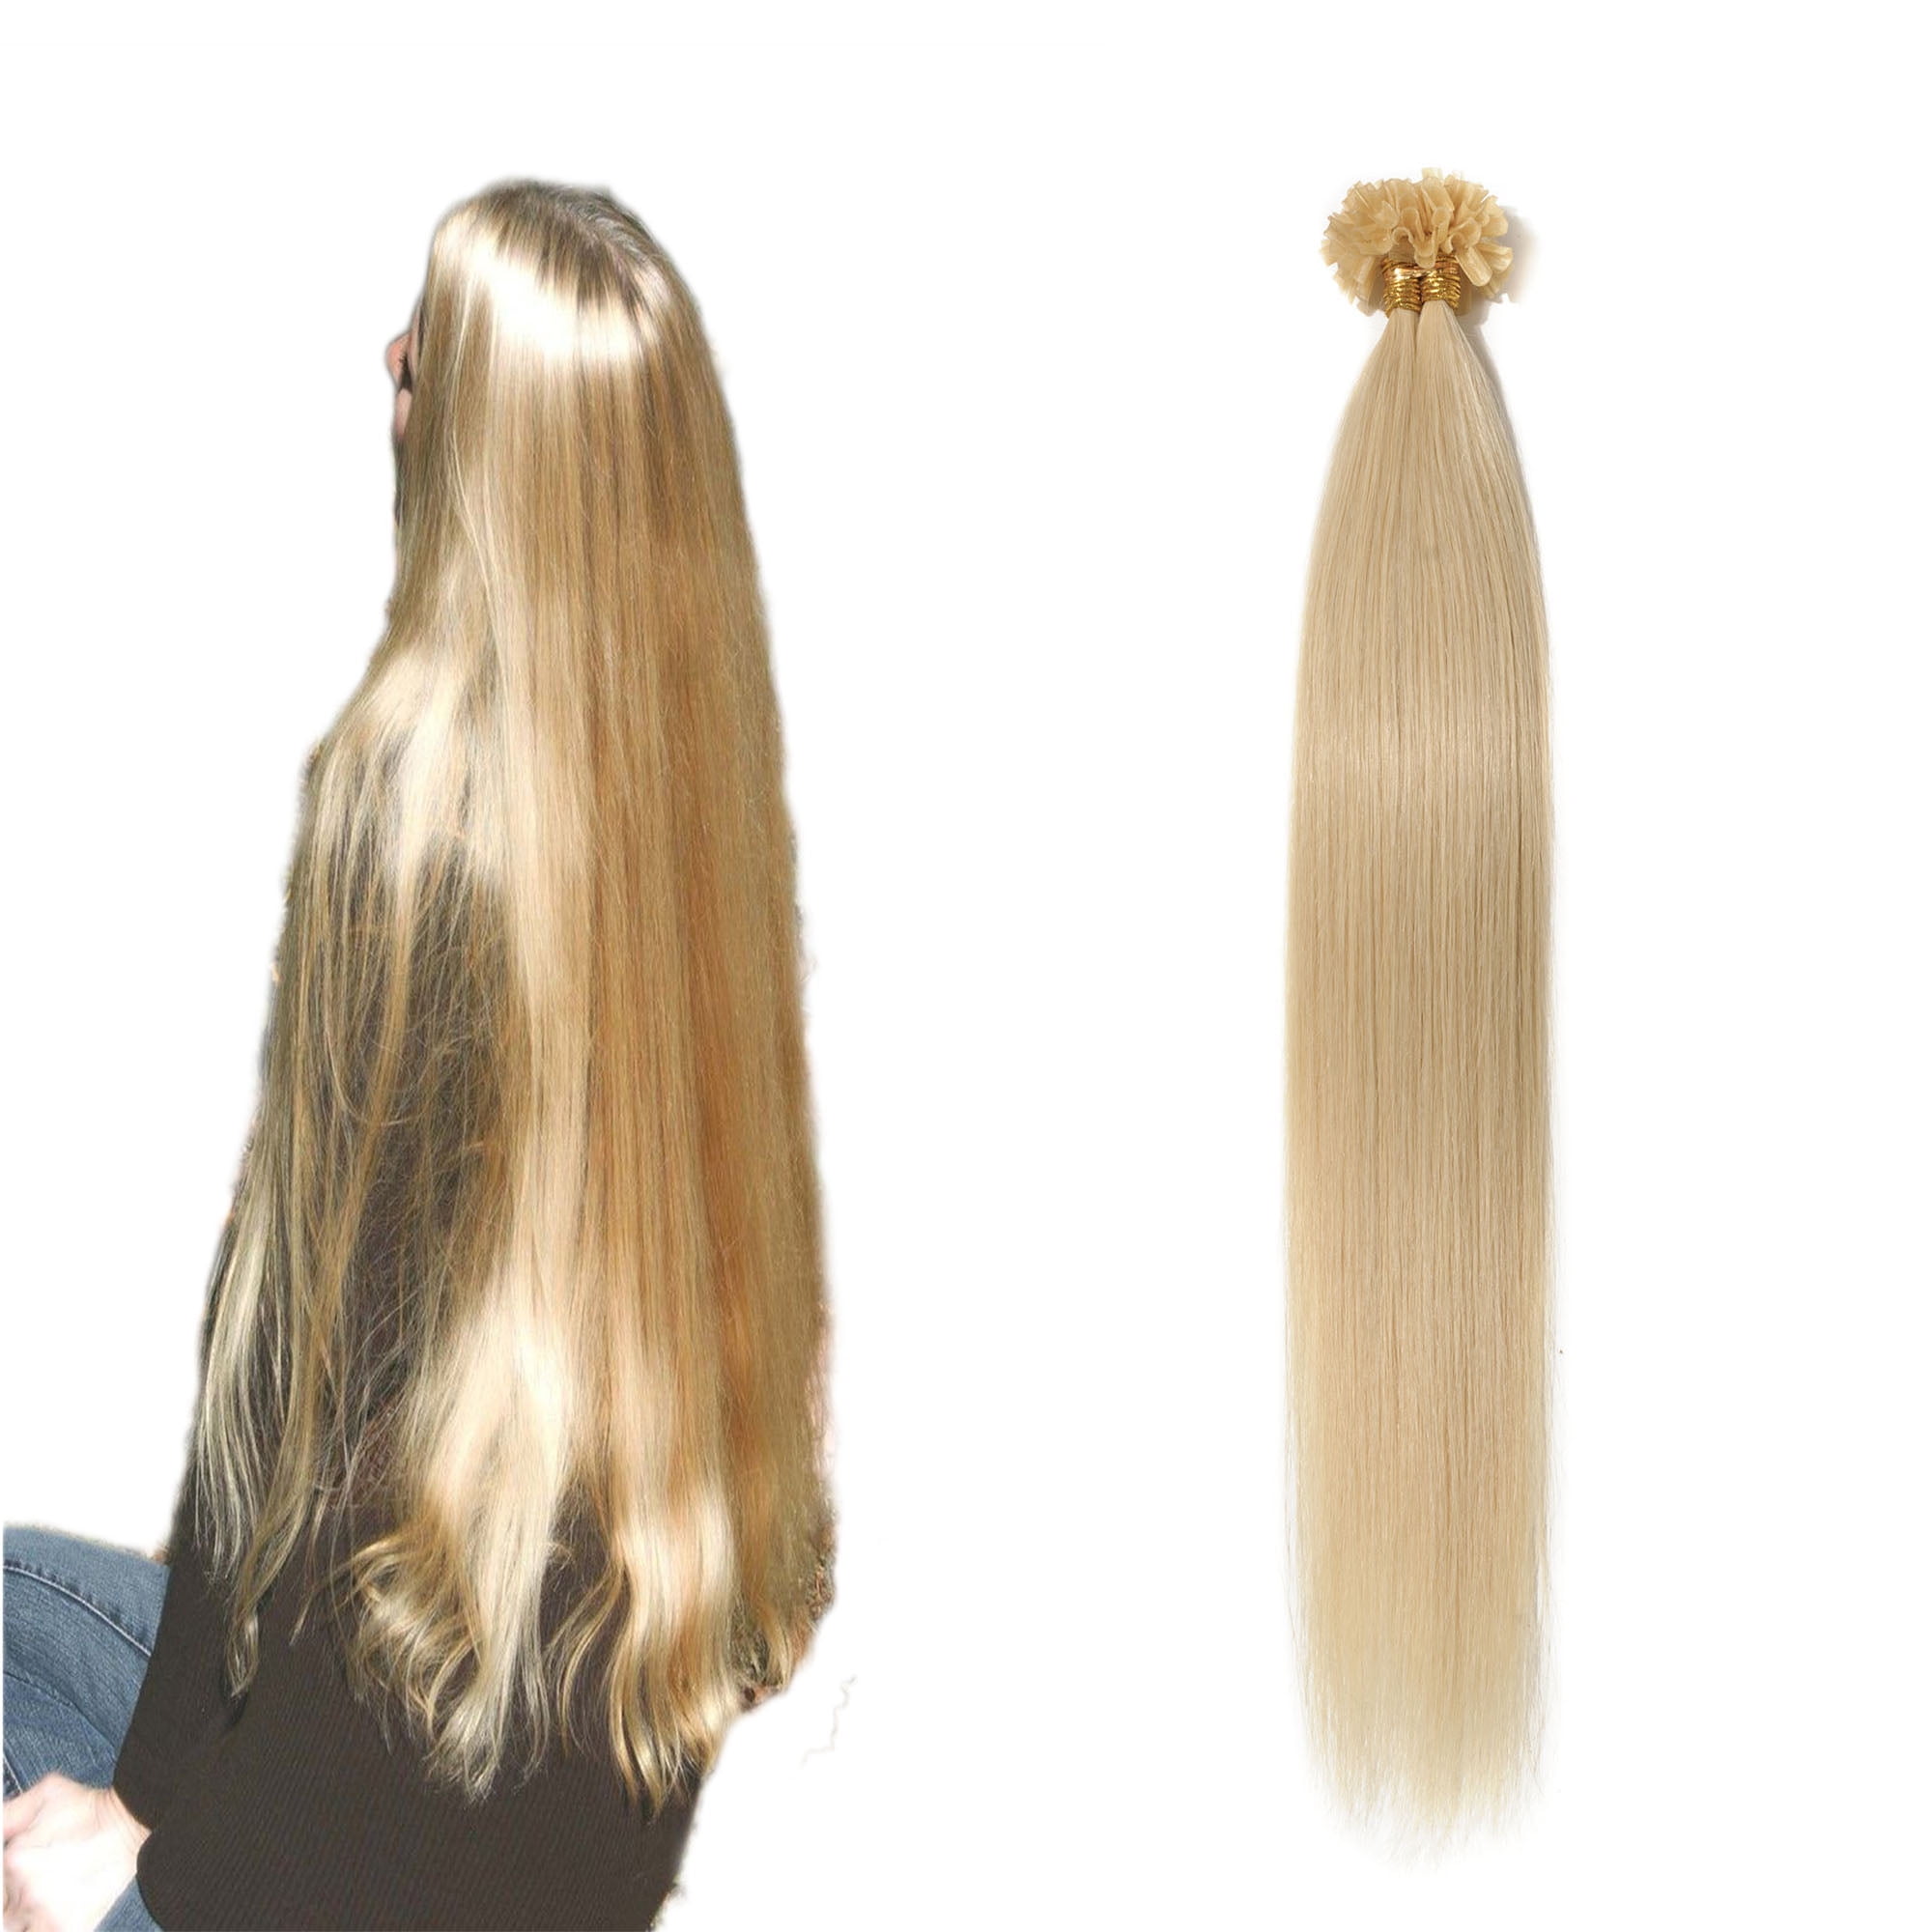 S Noilite 200 Strands Pre Bonded Human Hair Extensions U Tip Nail Tip